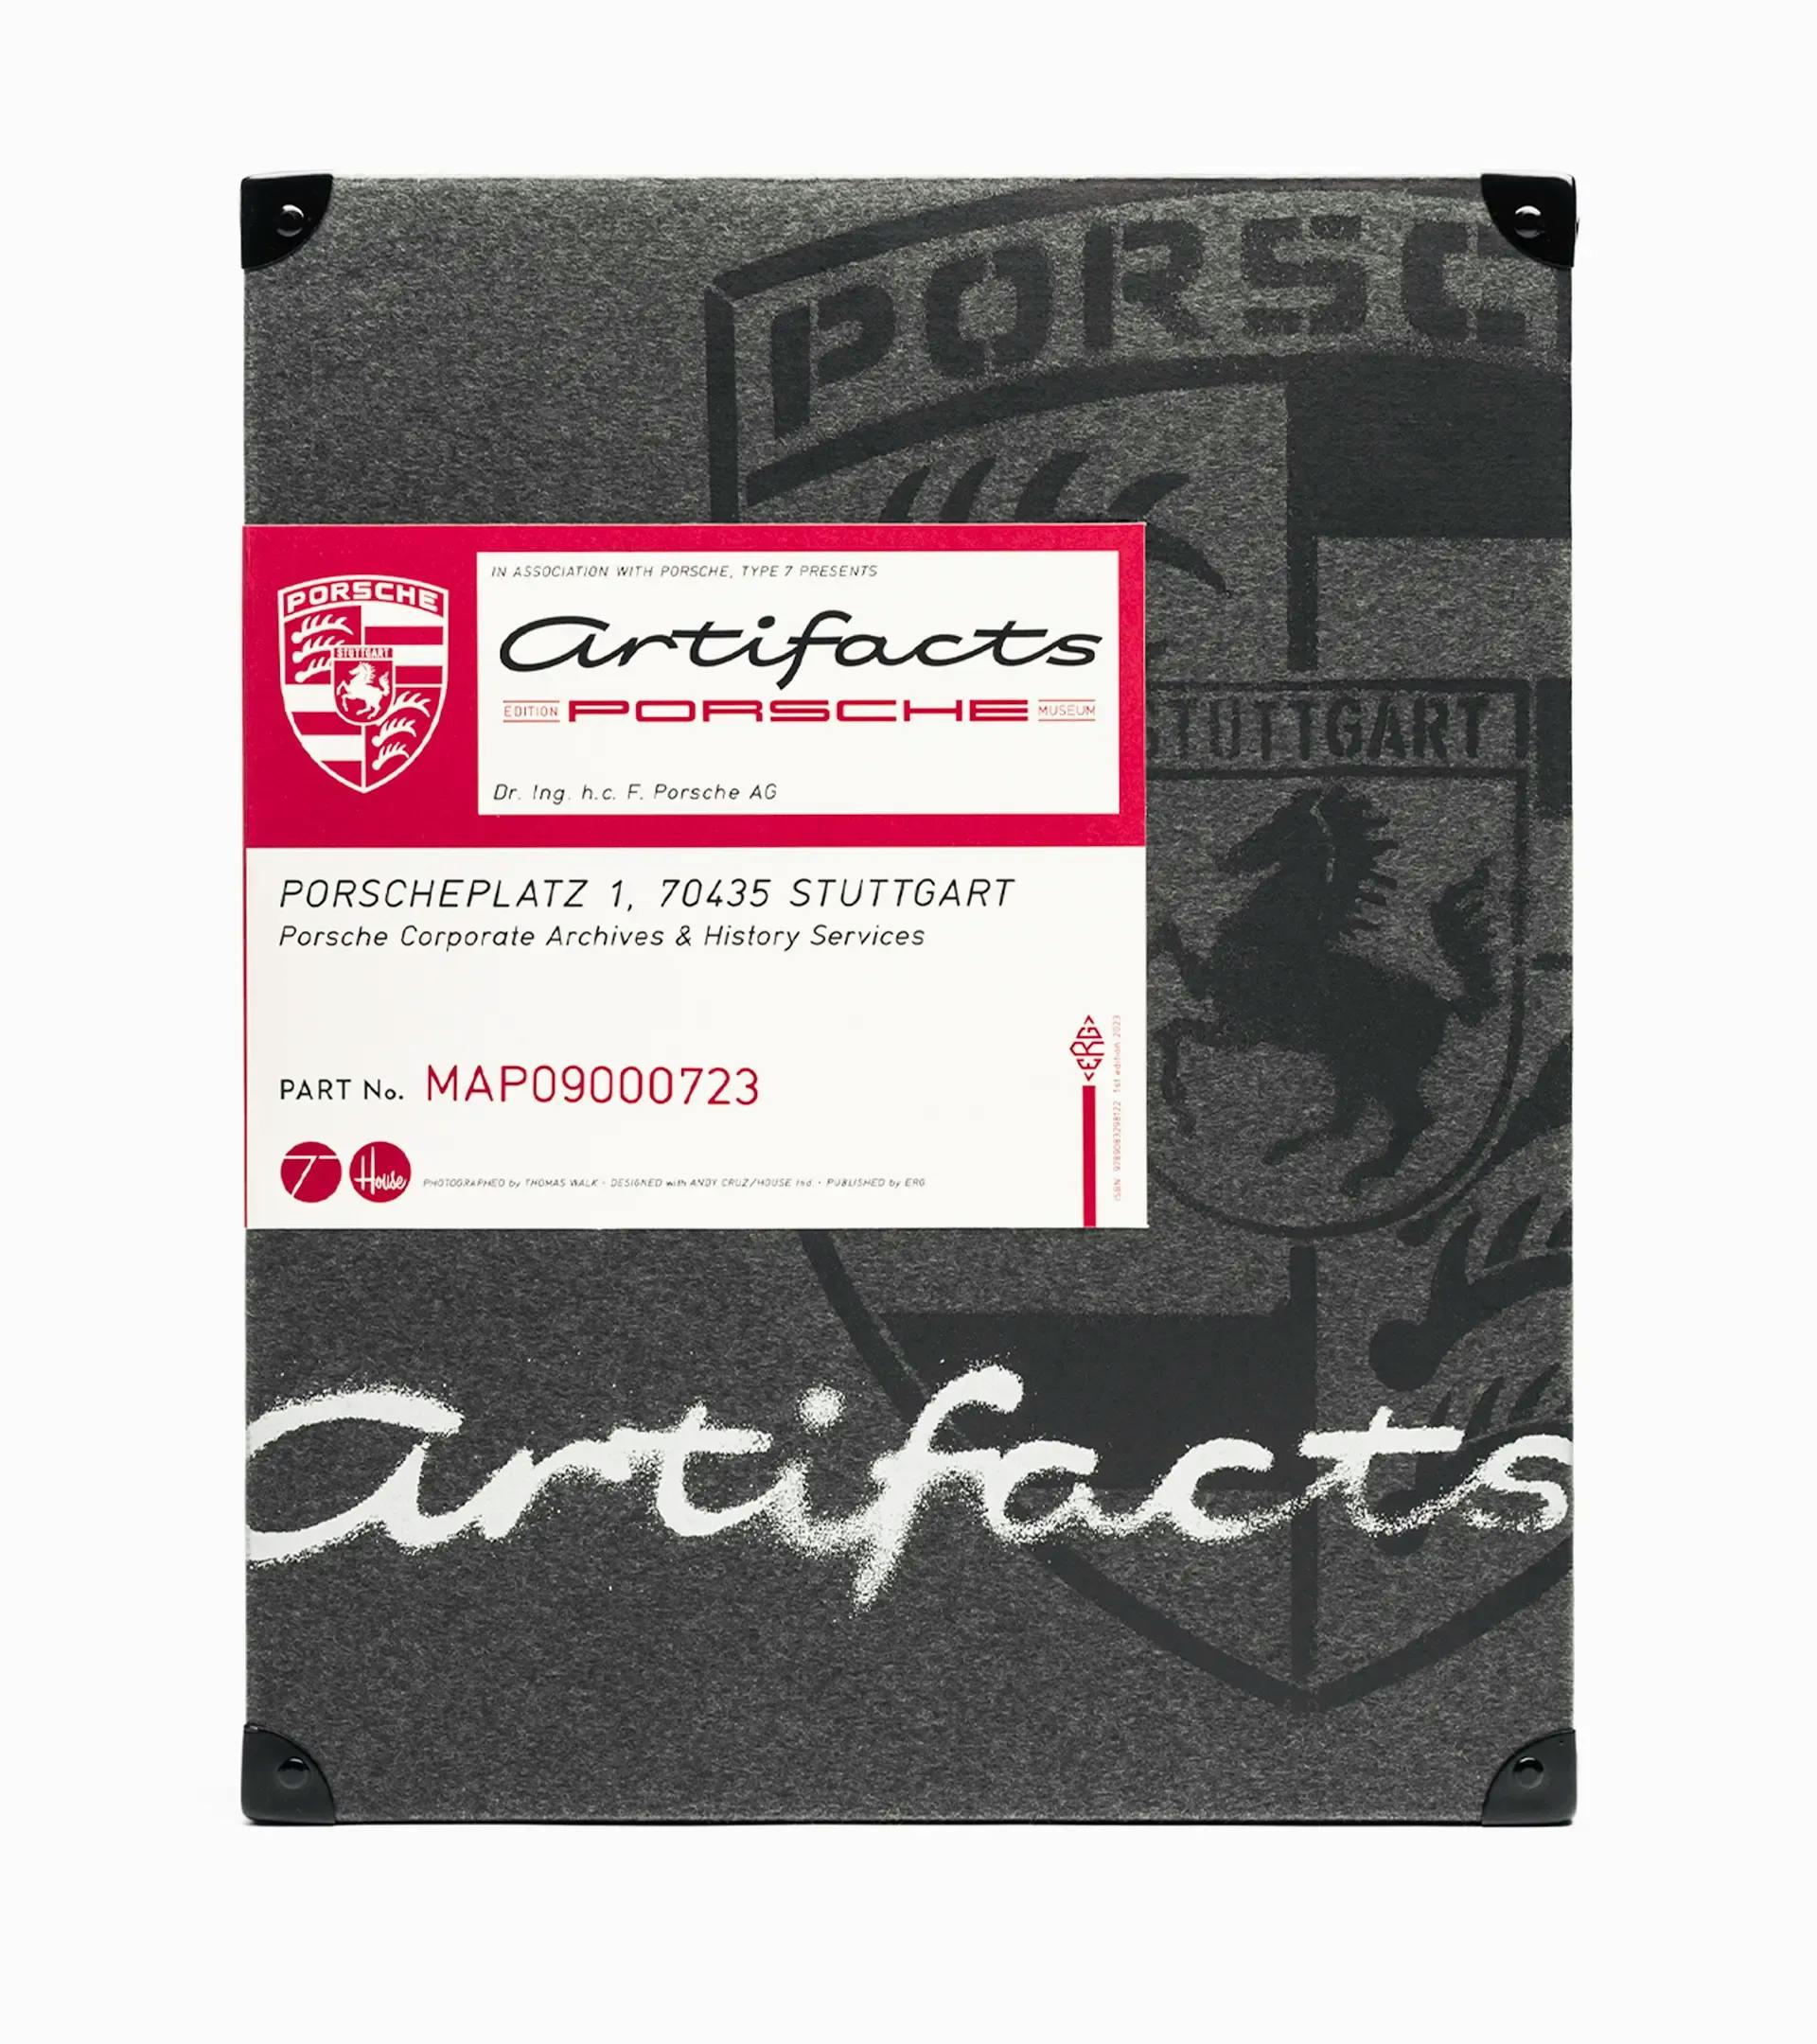  'Artifacts' book 1